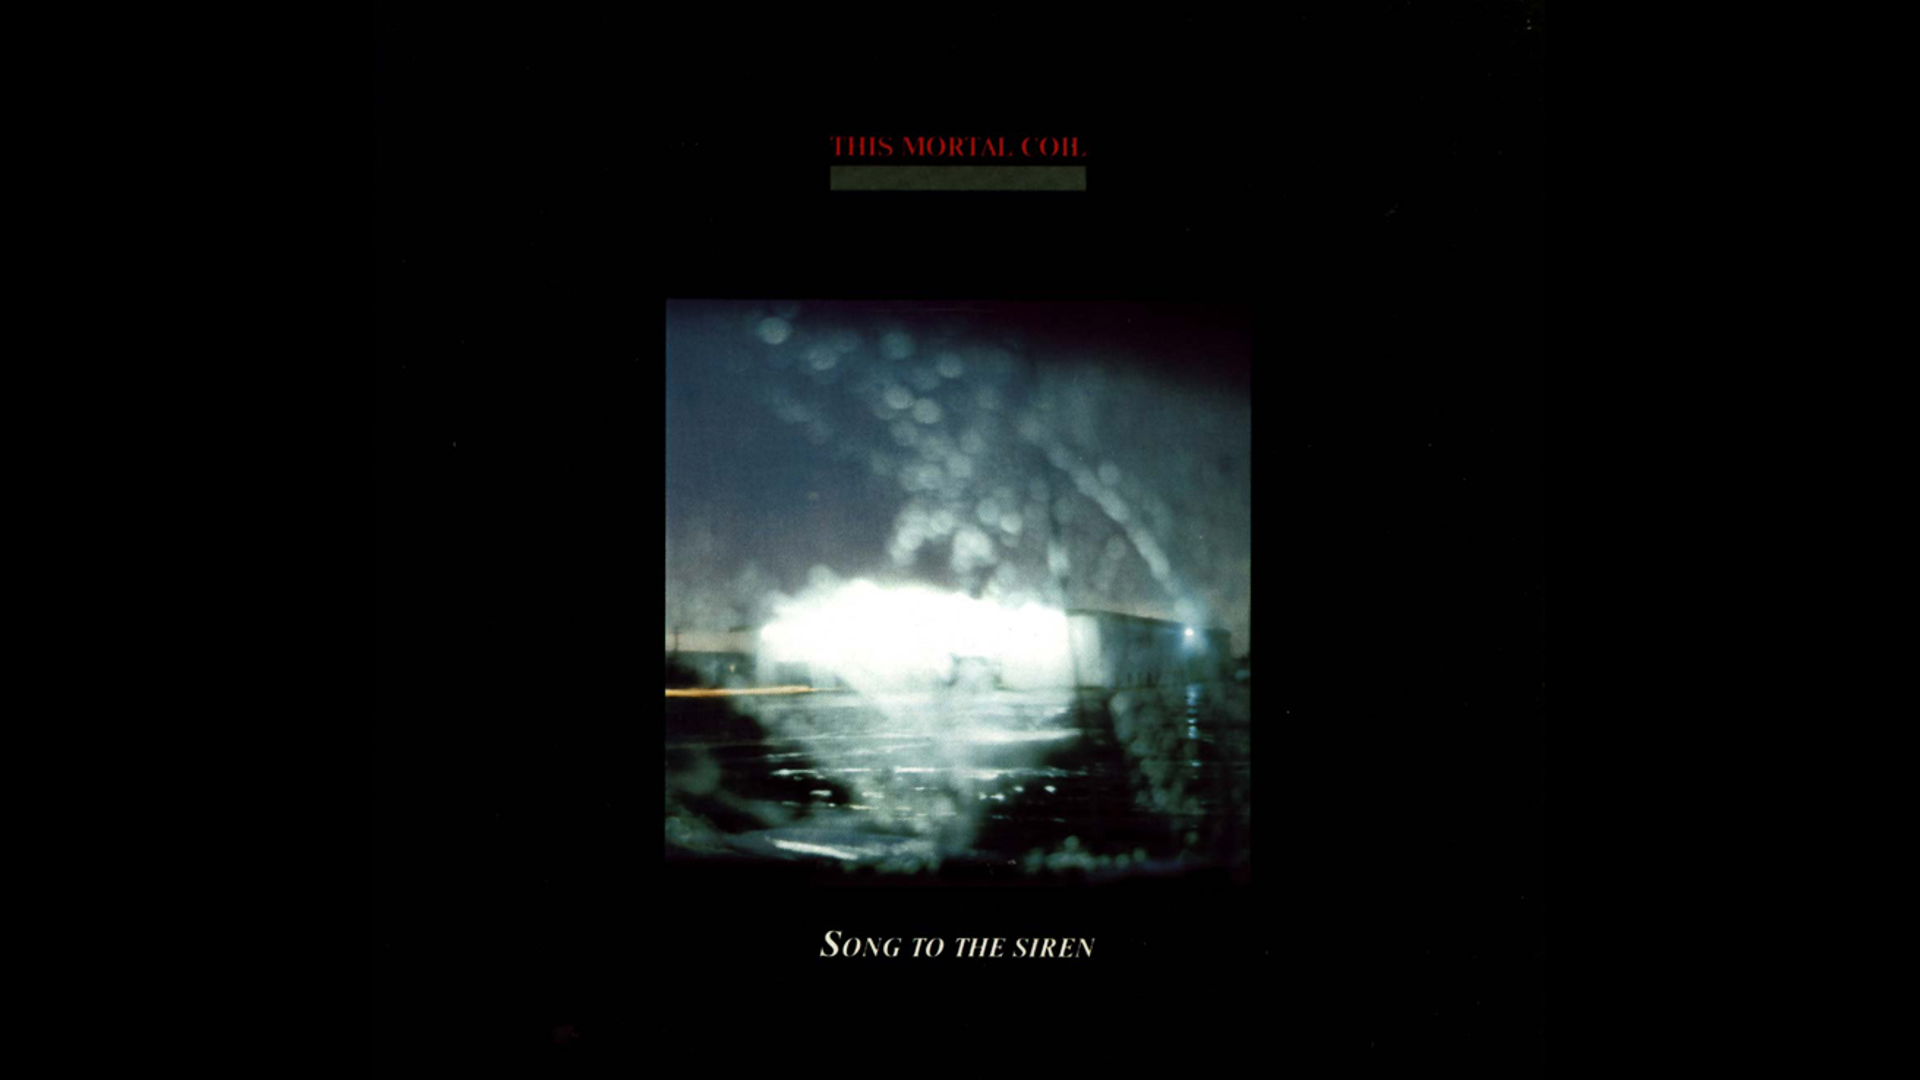 This Mortal Coil - "Song to the Siren" single ; 4AD